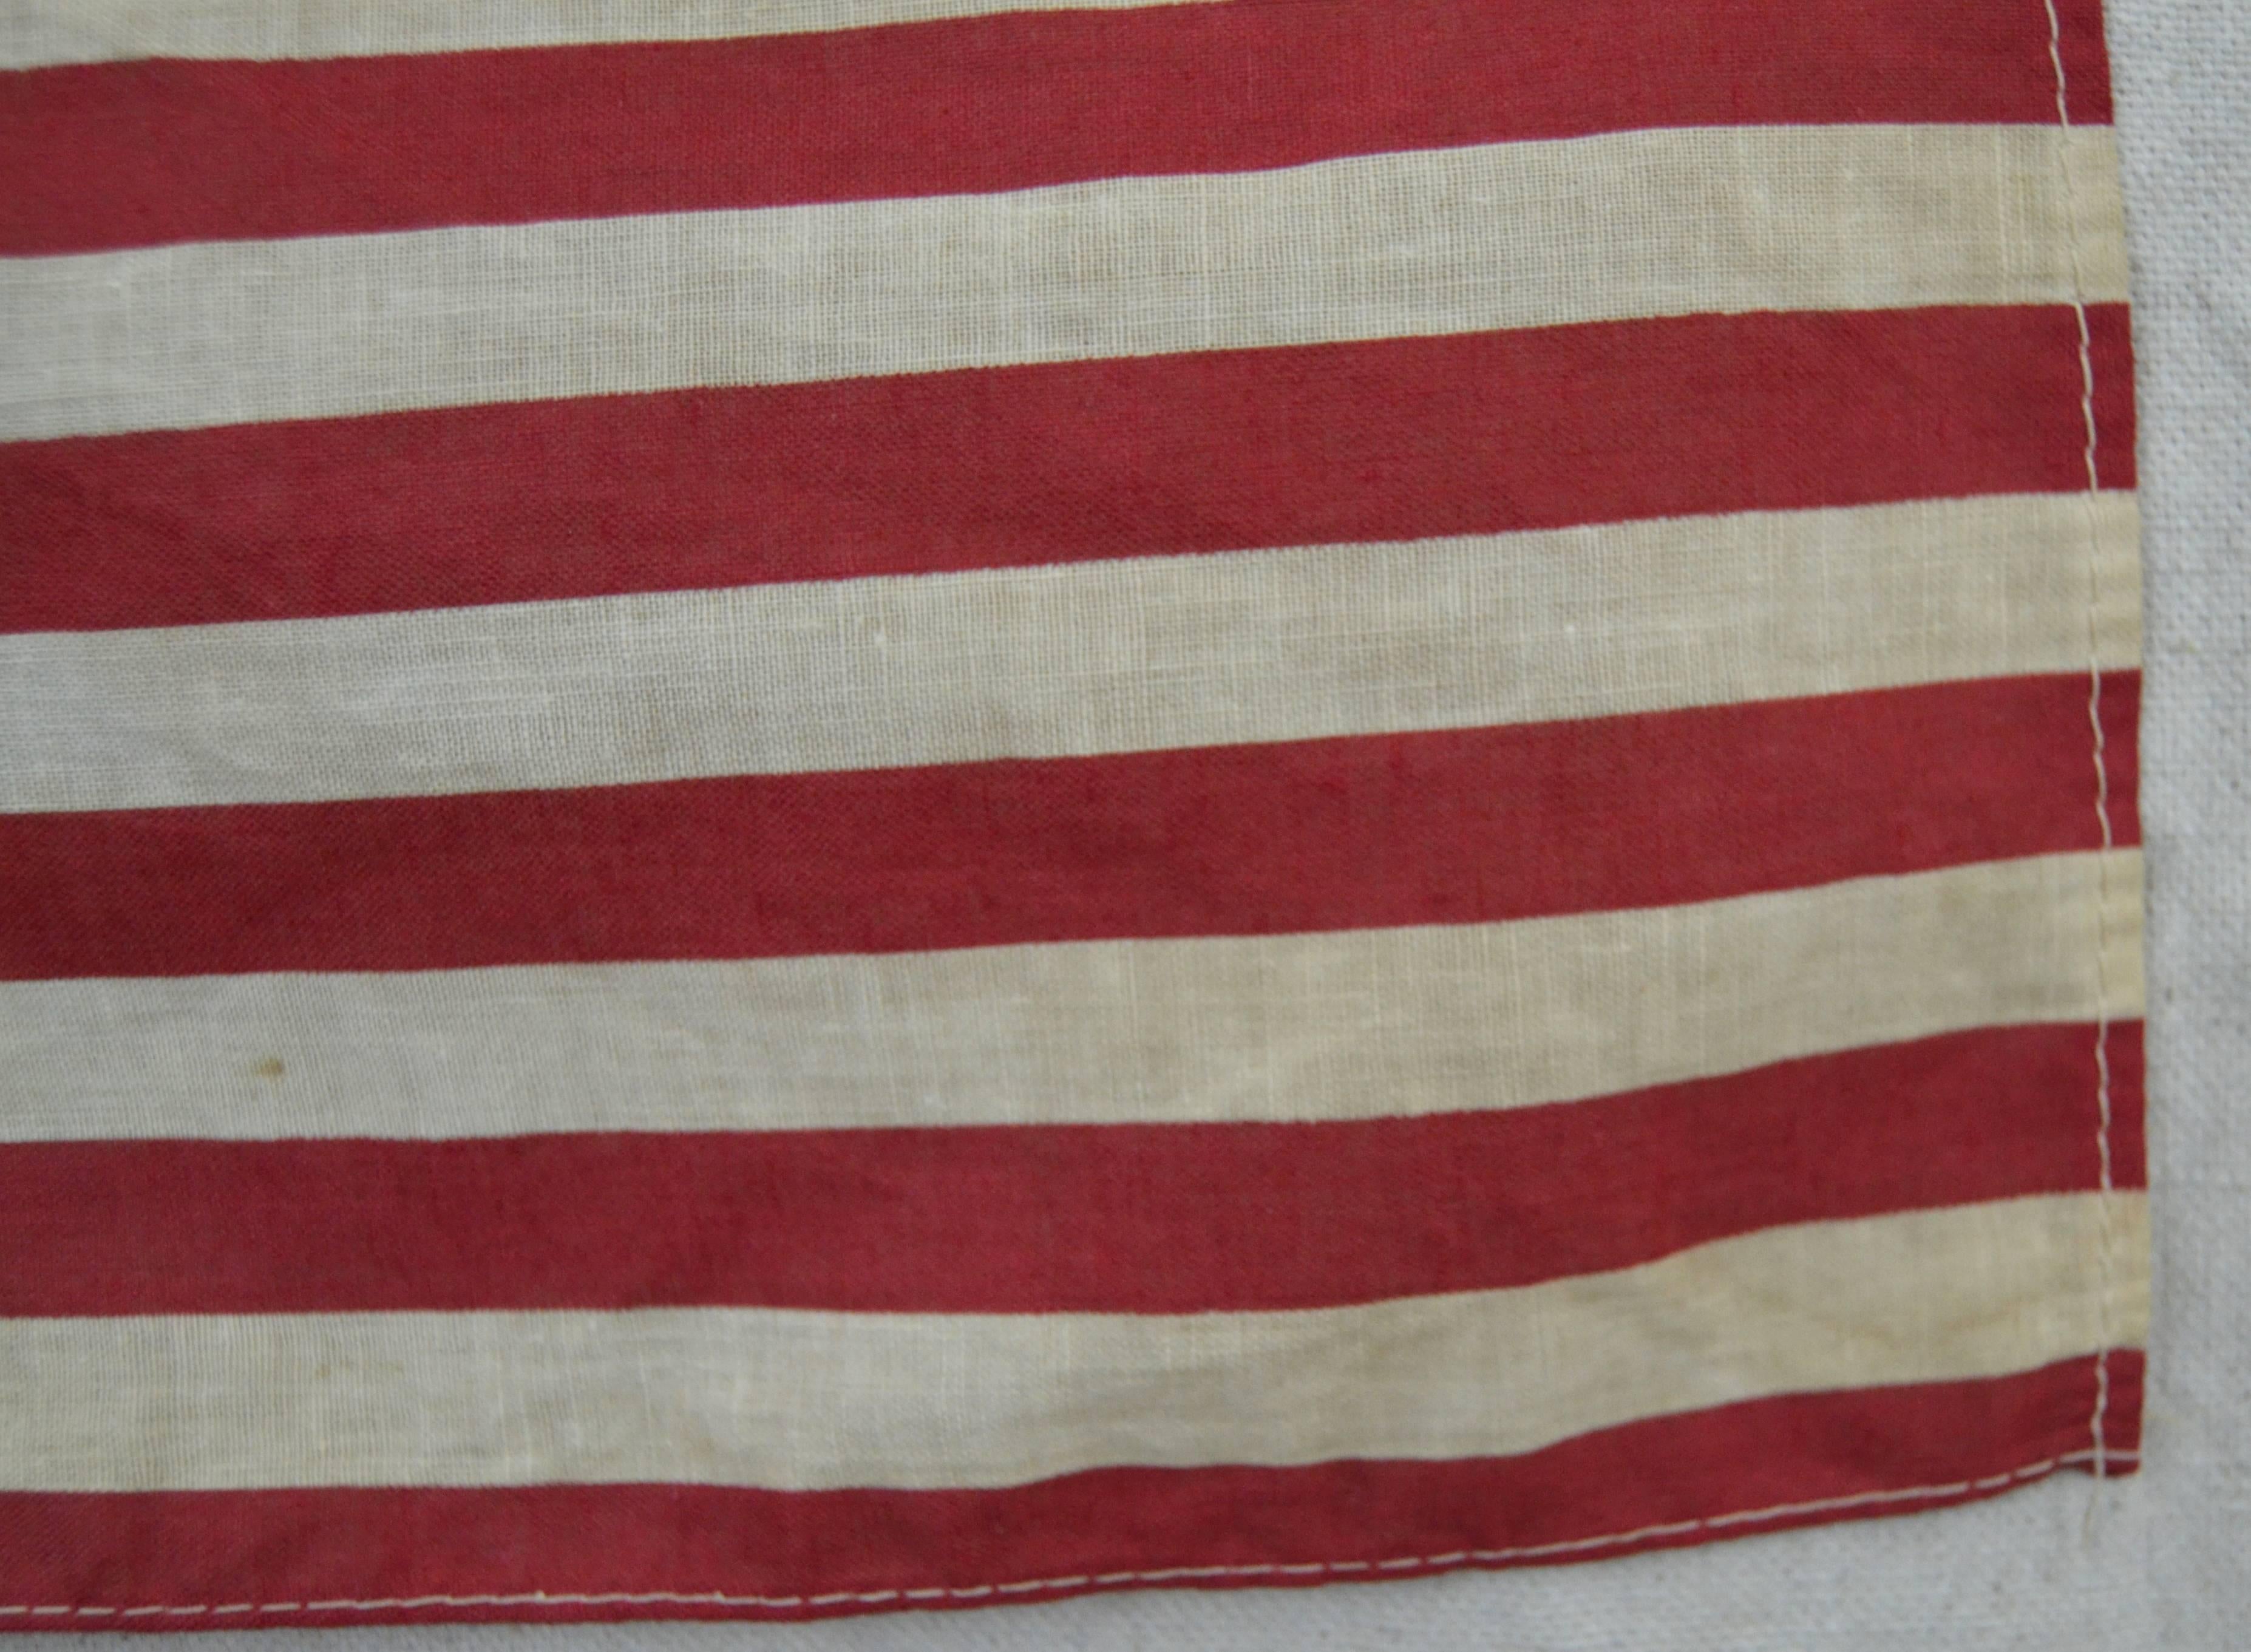 Very graphic and attractive printed cotton flag with sewn edge. 49 star flags were only official for one year when Alaska was admitted to the Union. Nicely sized small example with good overall toning. Unframed.